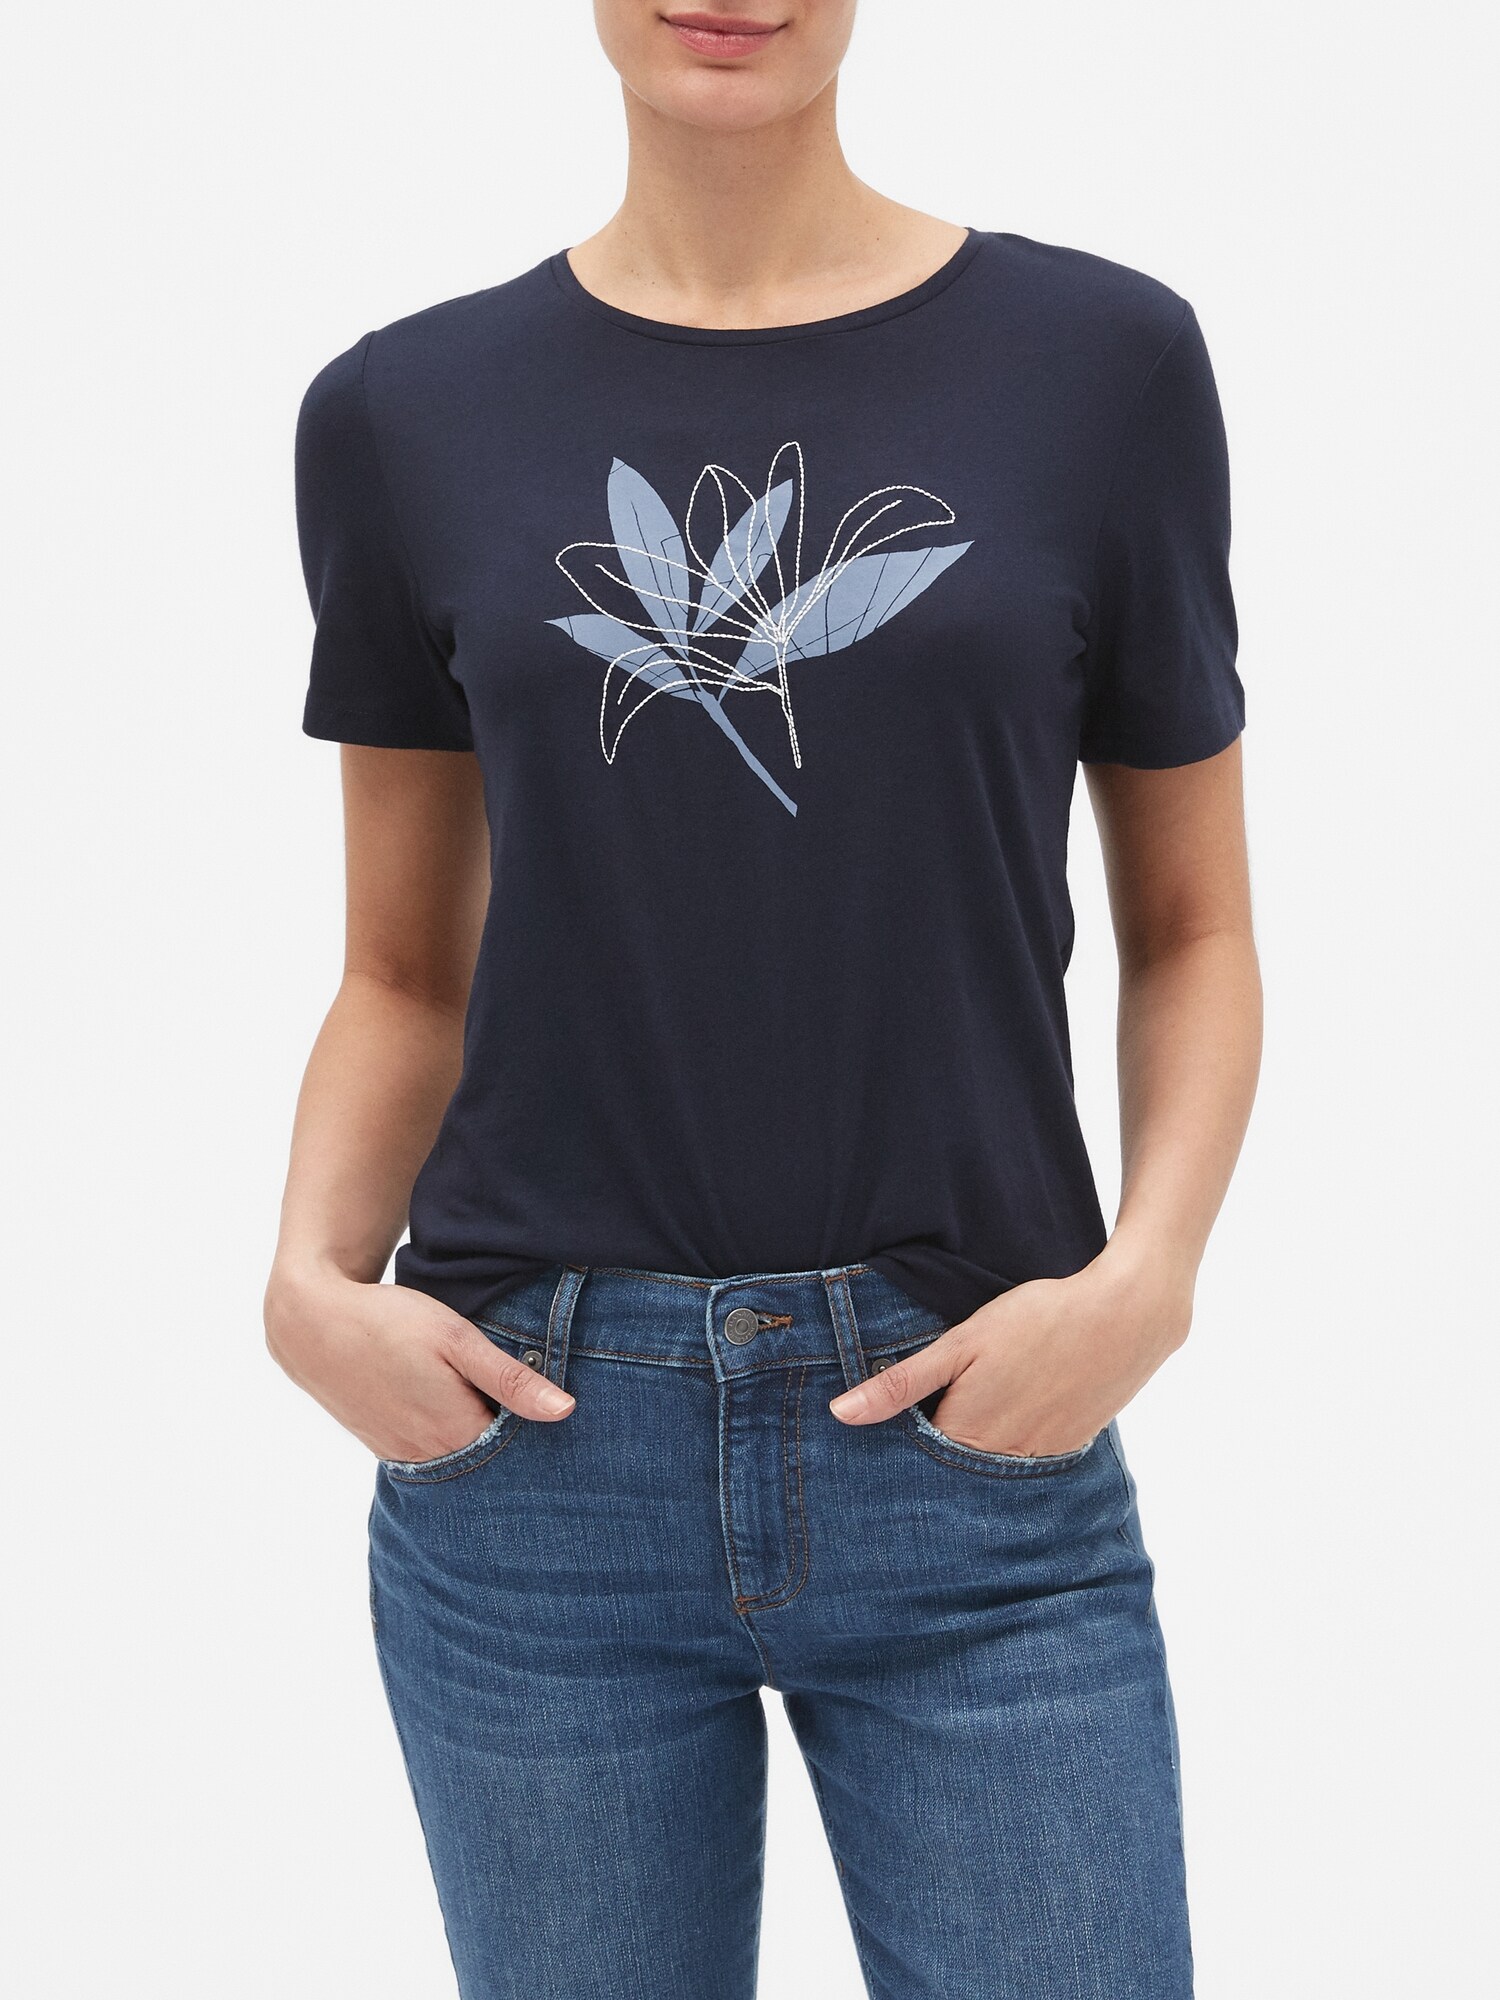 Spring Graphic T Shirt